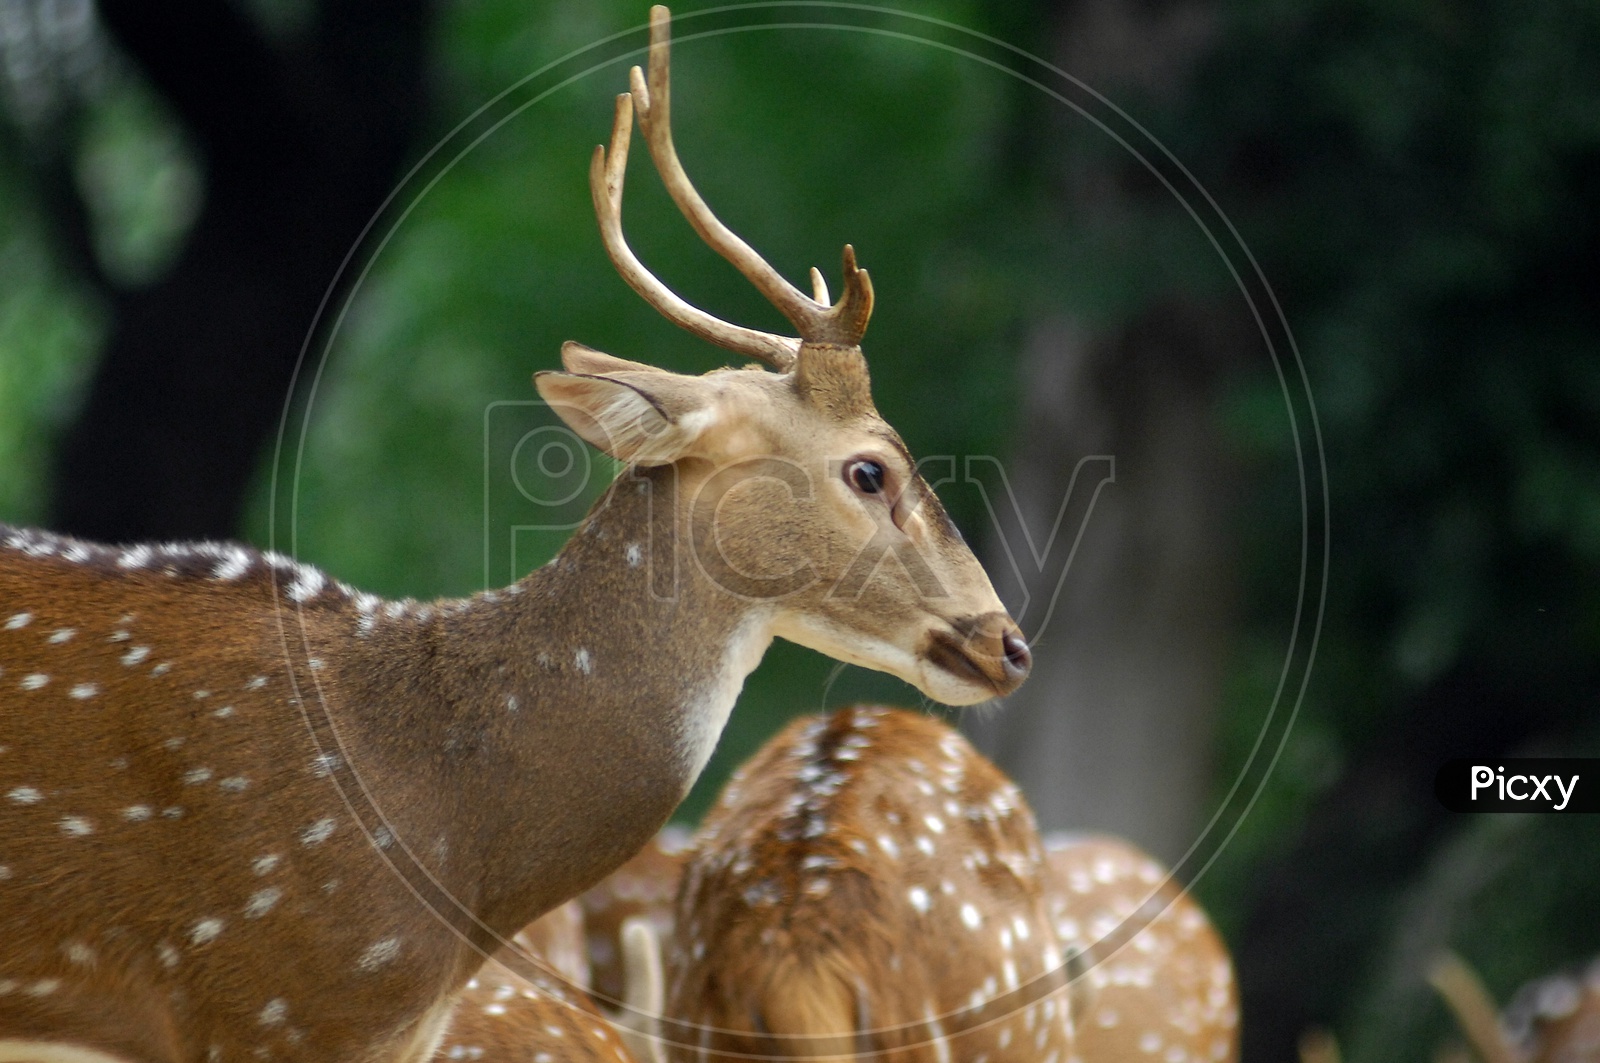 A White-tailed deer